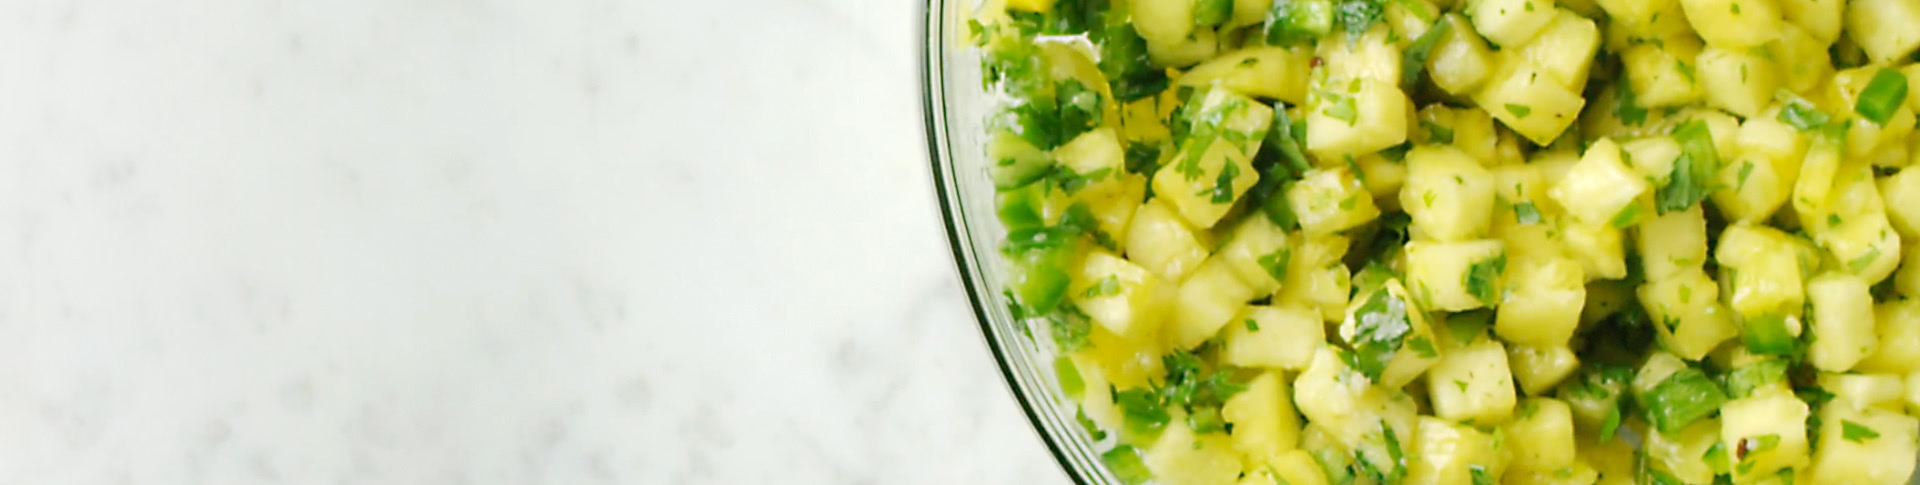 Pineapple Salsa with Spiced Tortilla Chips Recipe